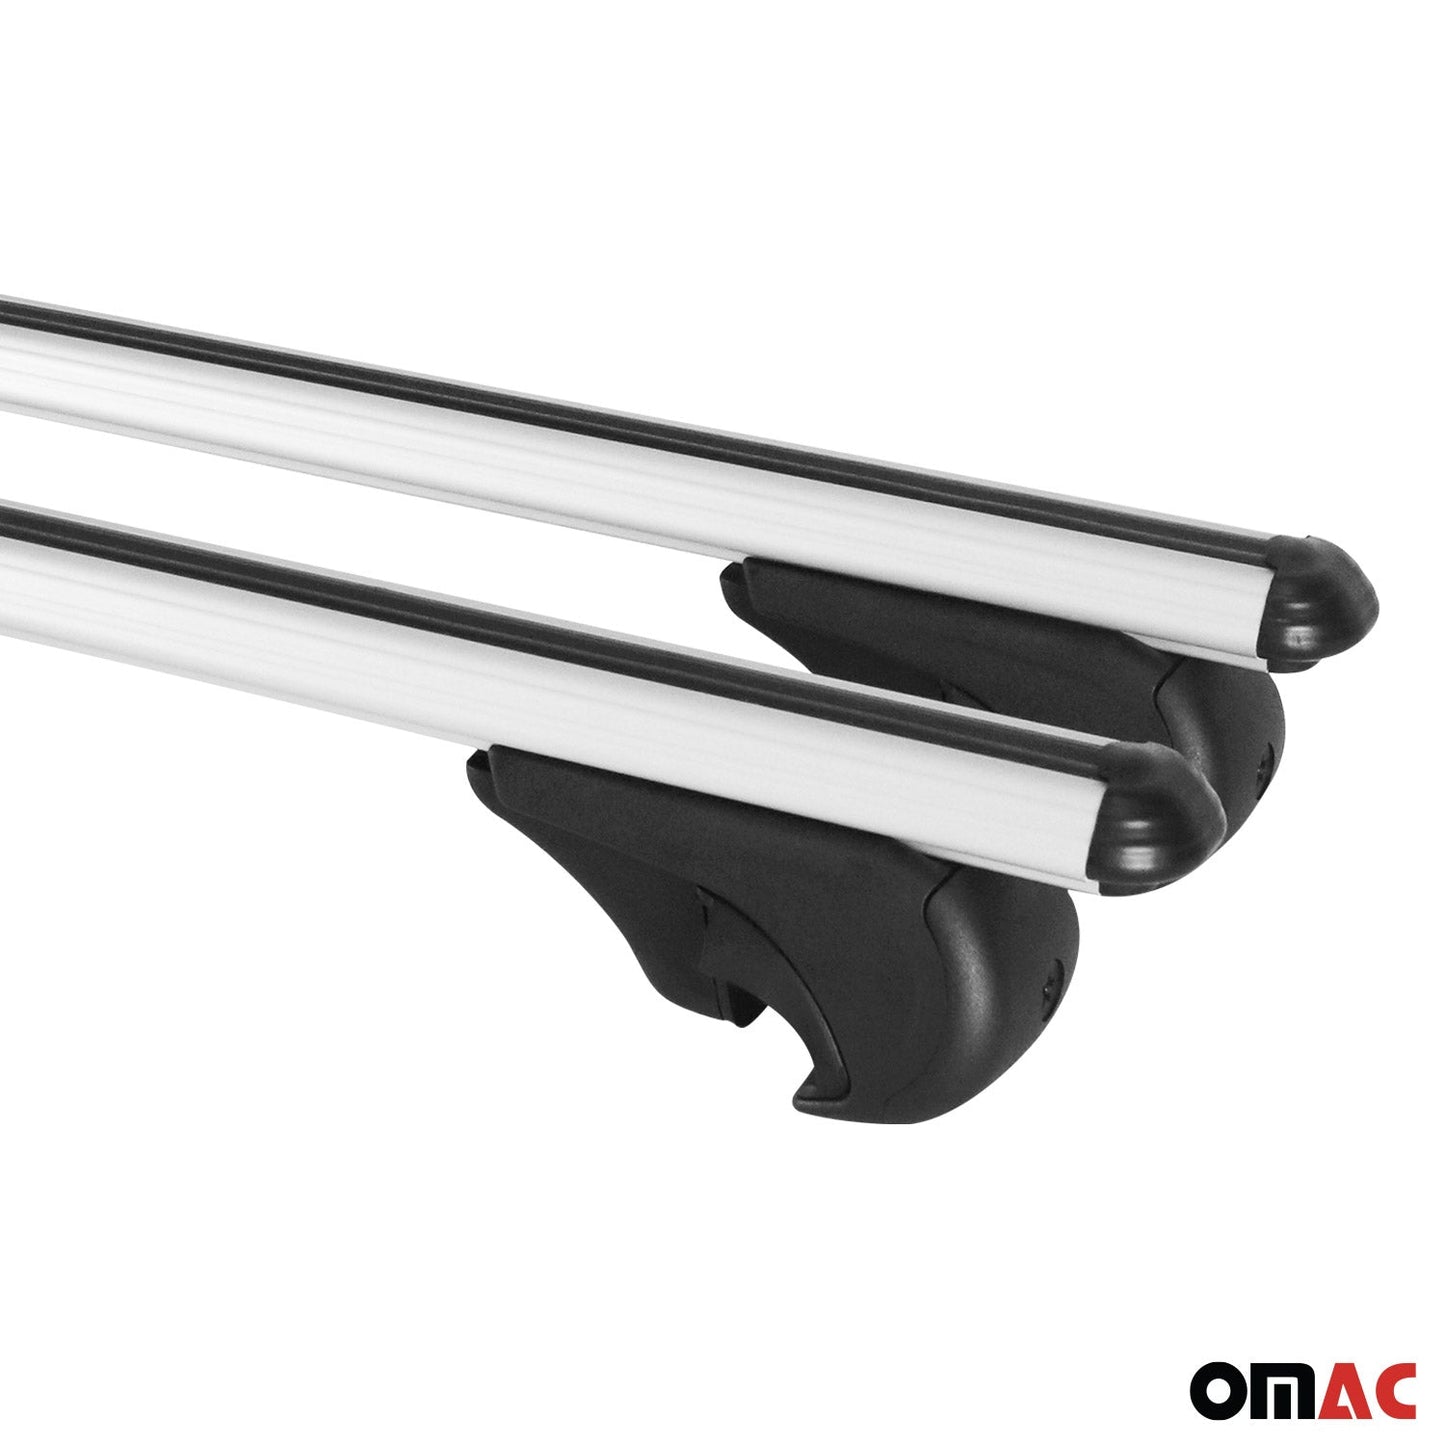 OMAC Lockable Roof Rack Cross Bars Luggage Carrier for Jeep Patriot 2007-2017 Gray 17059696929M